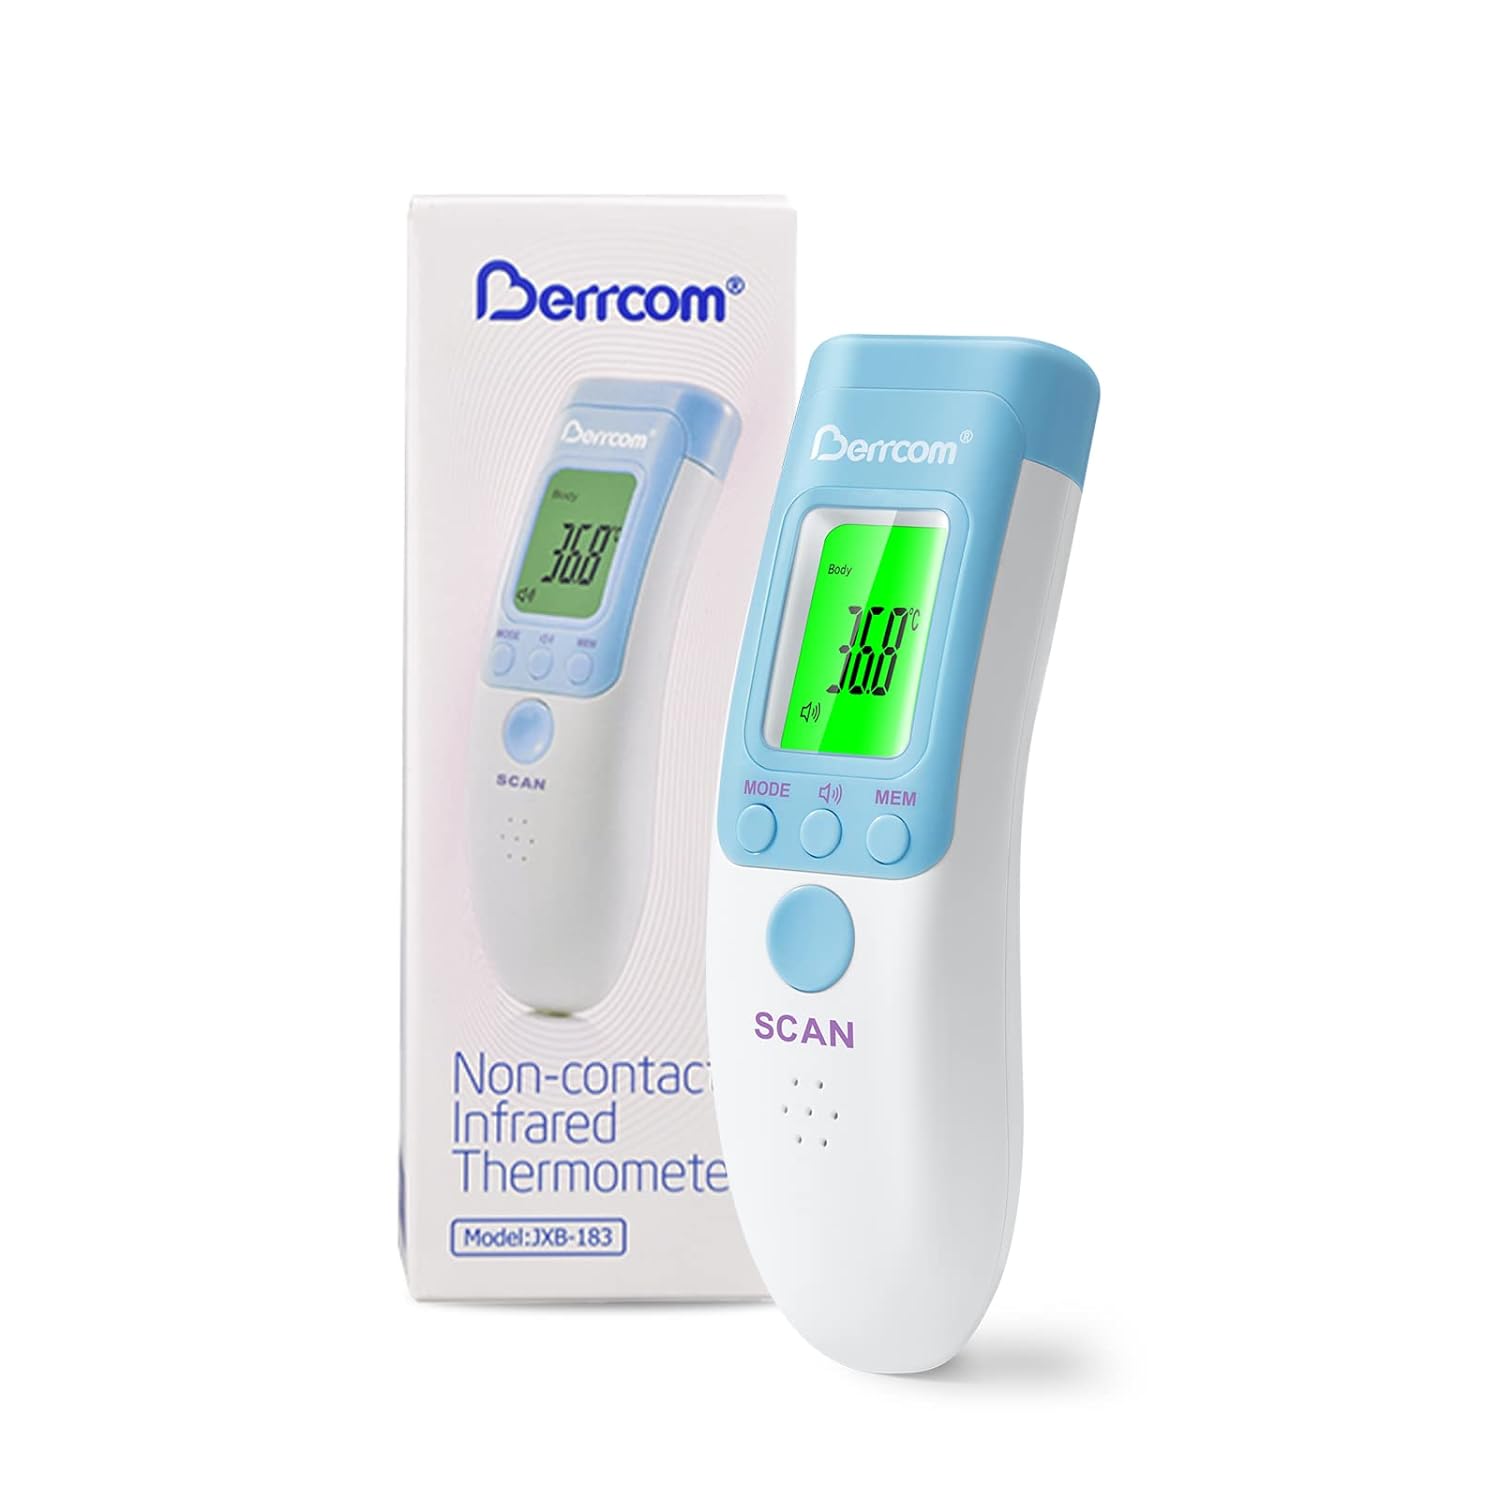 Berrcom Forehead Thermometer for Adults and Kids, Non Contact Infrared Thermometer for Object, Room, Touchless Digital Thermometer with Fever Alert